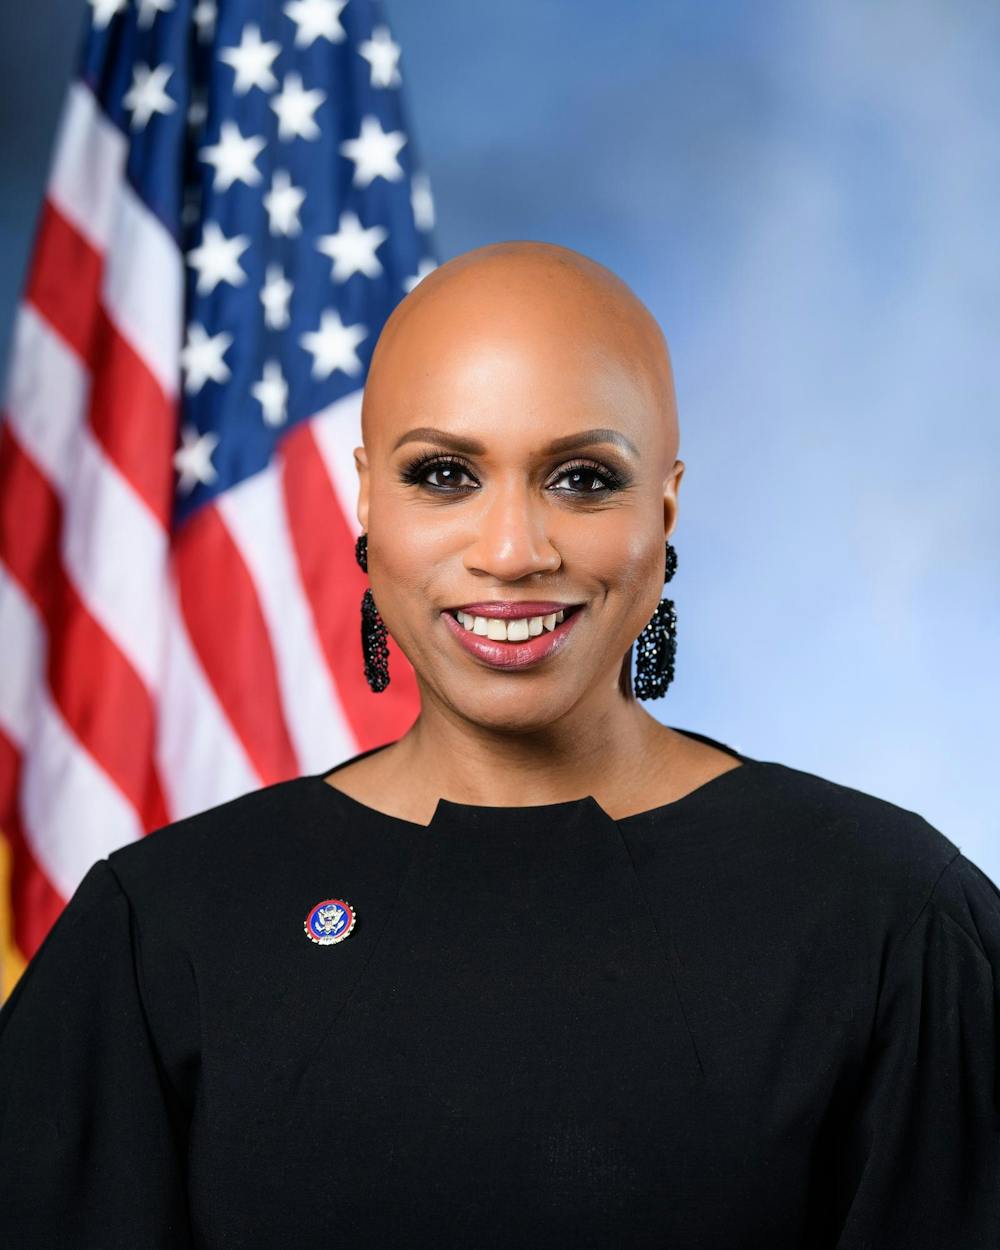 <p>Pressley was the first African American woman elected to the Boston City Council and the first African American woman elected to represent Massachusetts in Congress in 2018.</p><p>Courtesy of U.S. House of Representatives via Wikimedia Commons </p>